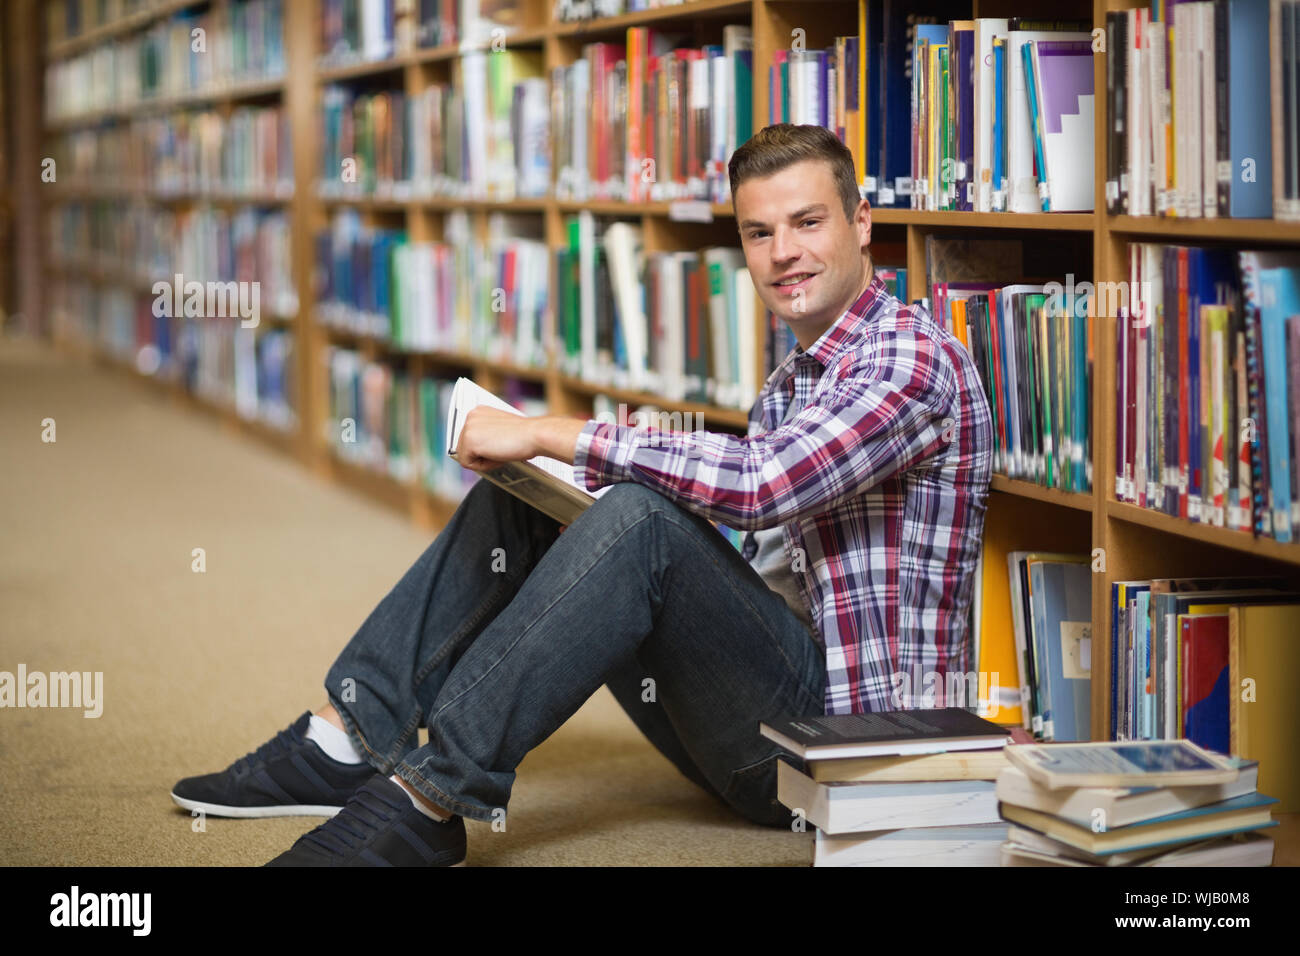 Happy student sitting on library floor reading Stock Photo